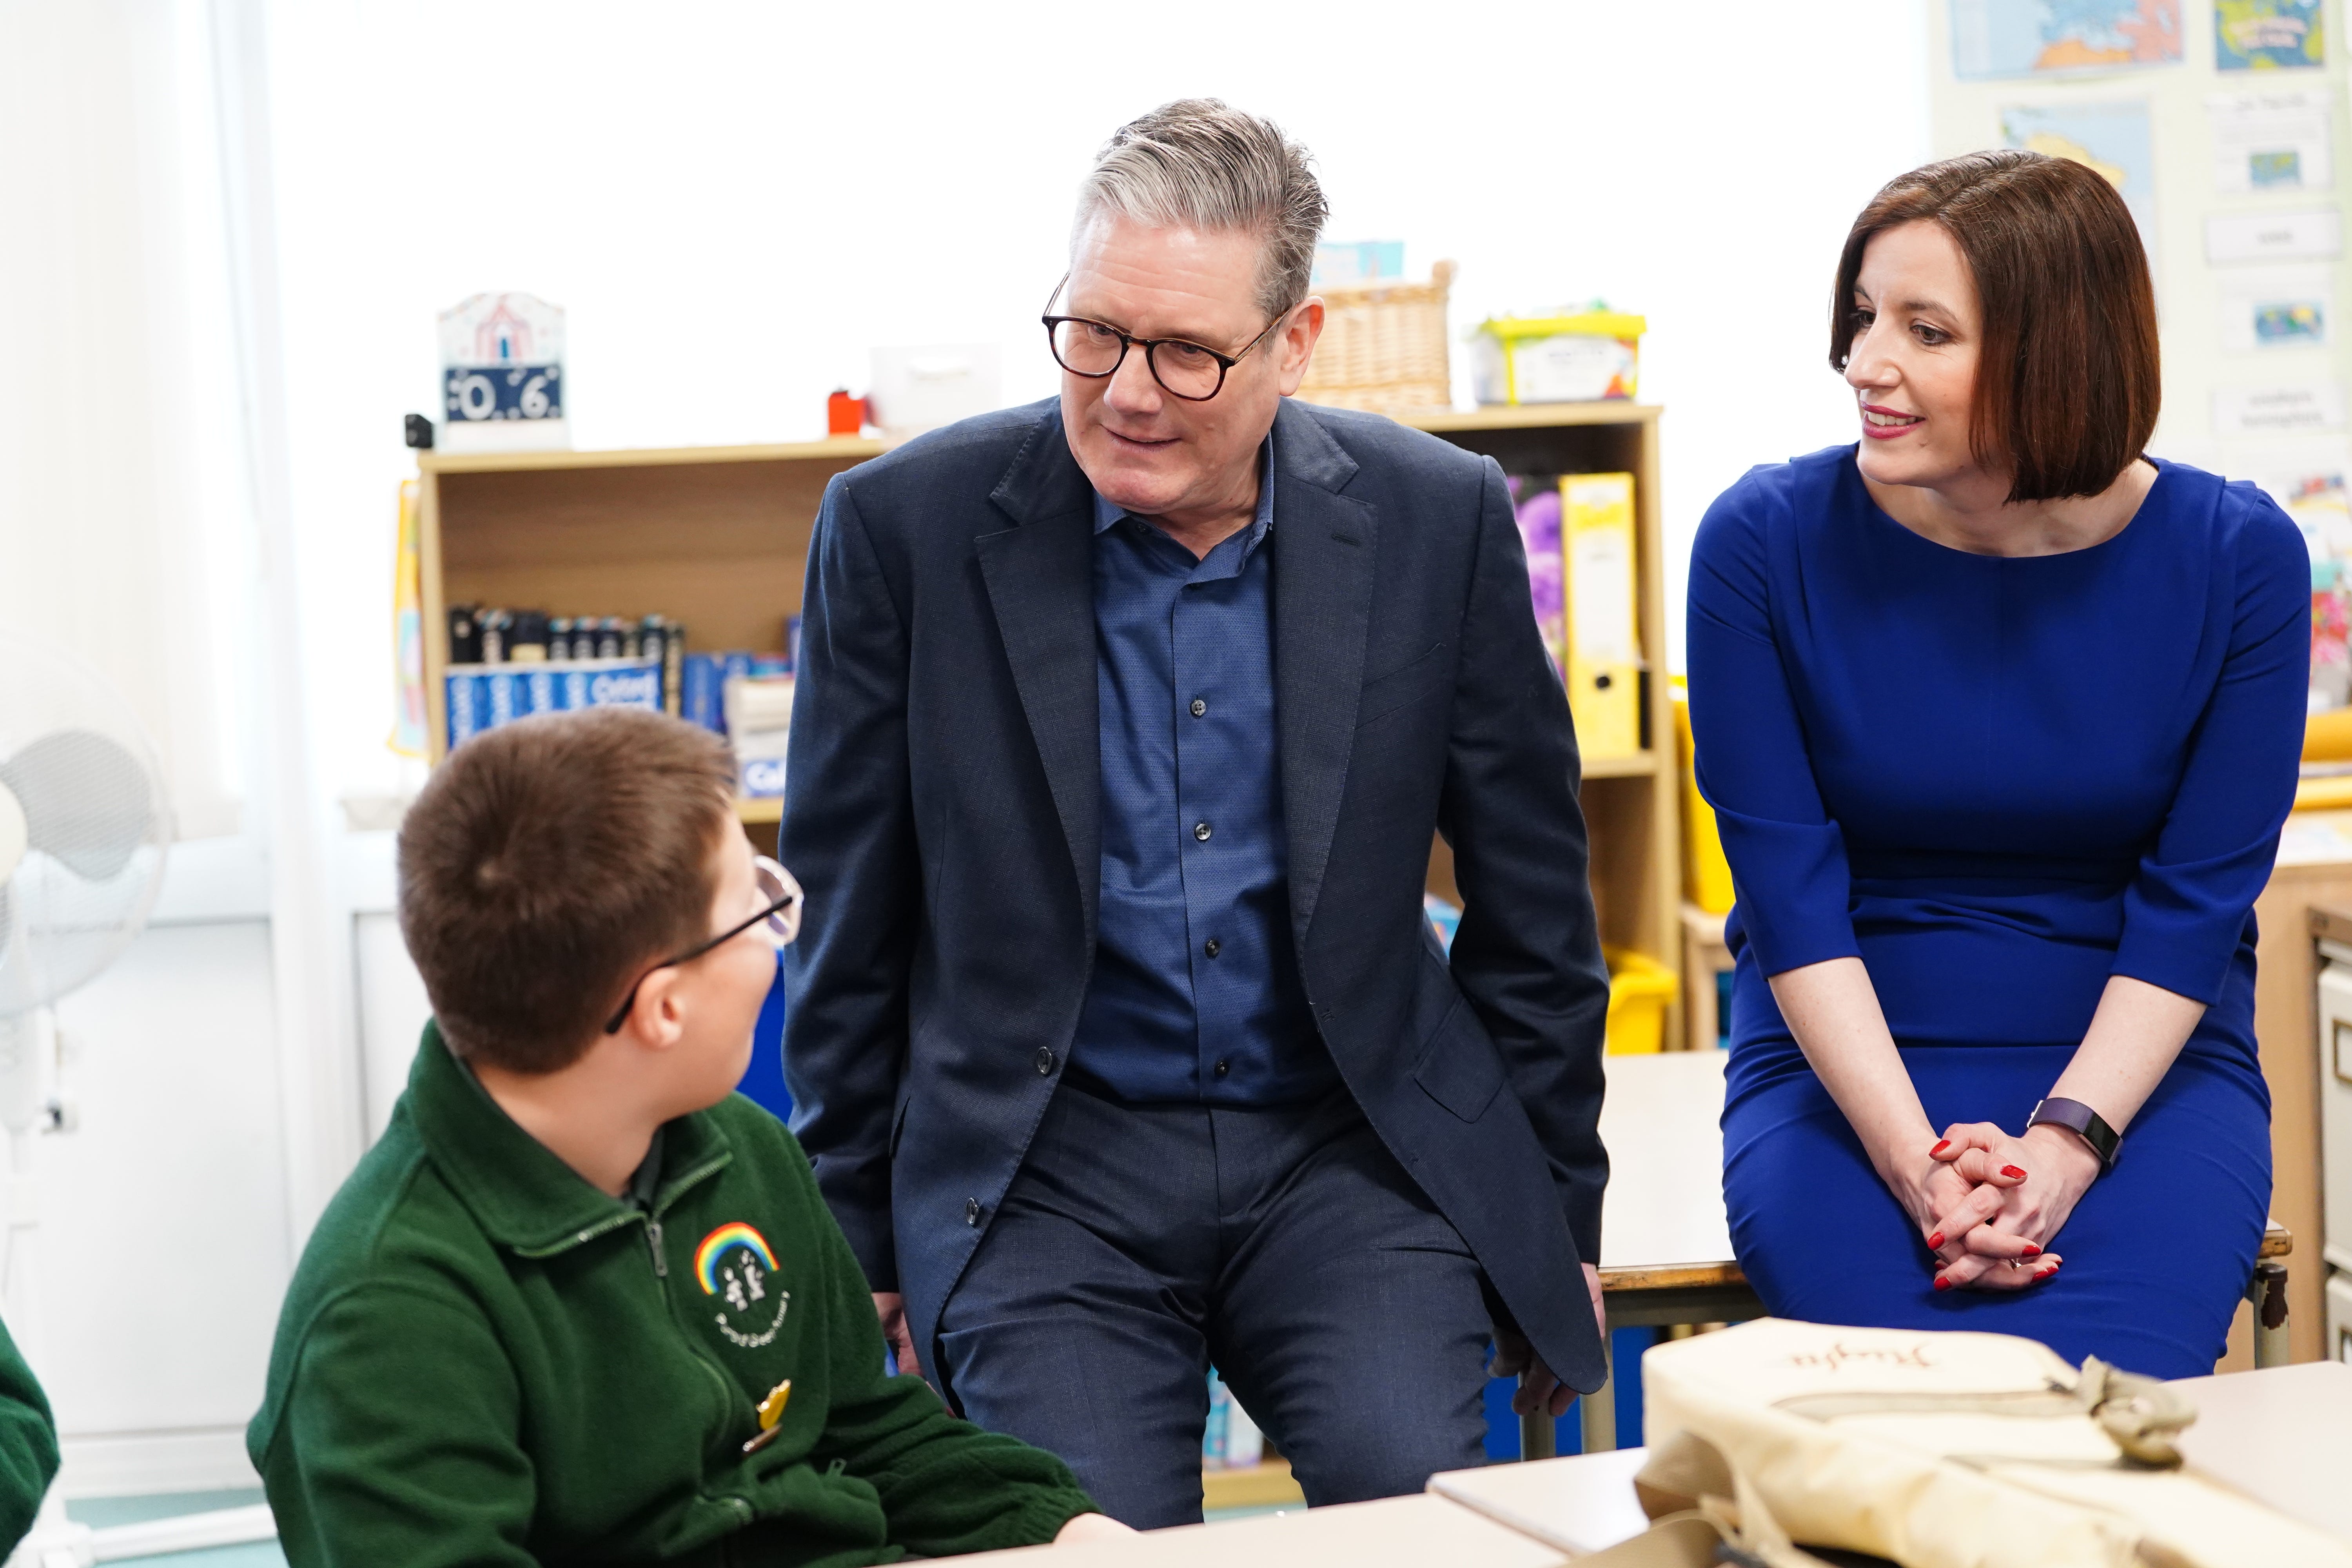 Sir Keir Starmer and shadow education secretary Bridget Phillipson during a visit to a school in Harlow in Essex (Ian West/PA)